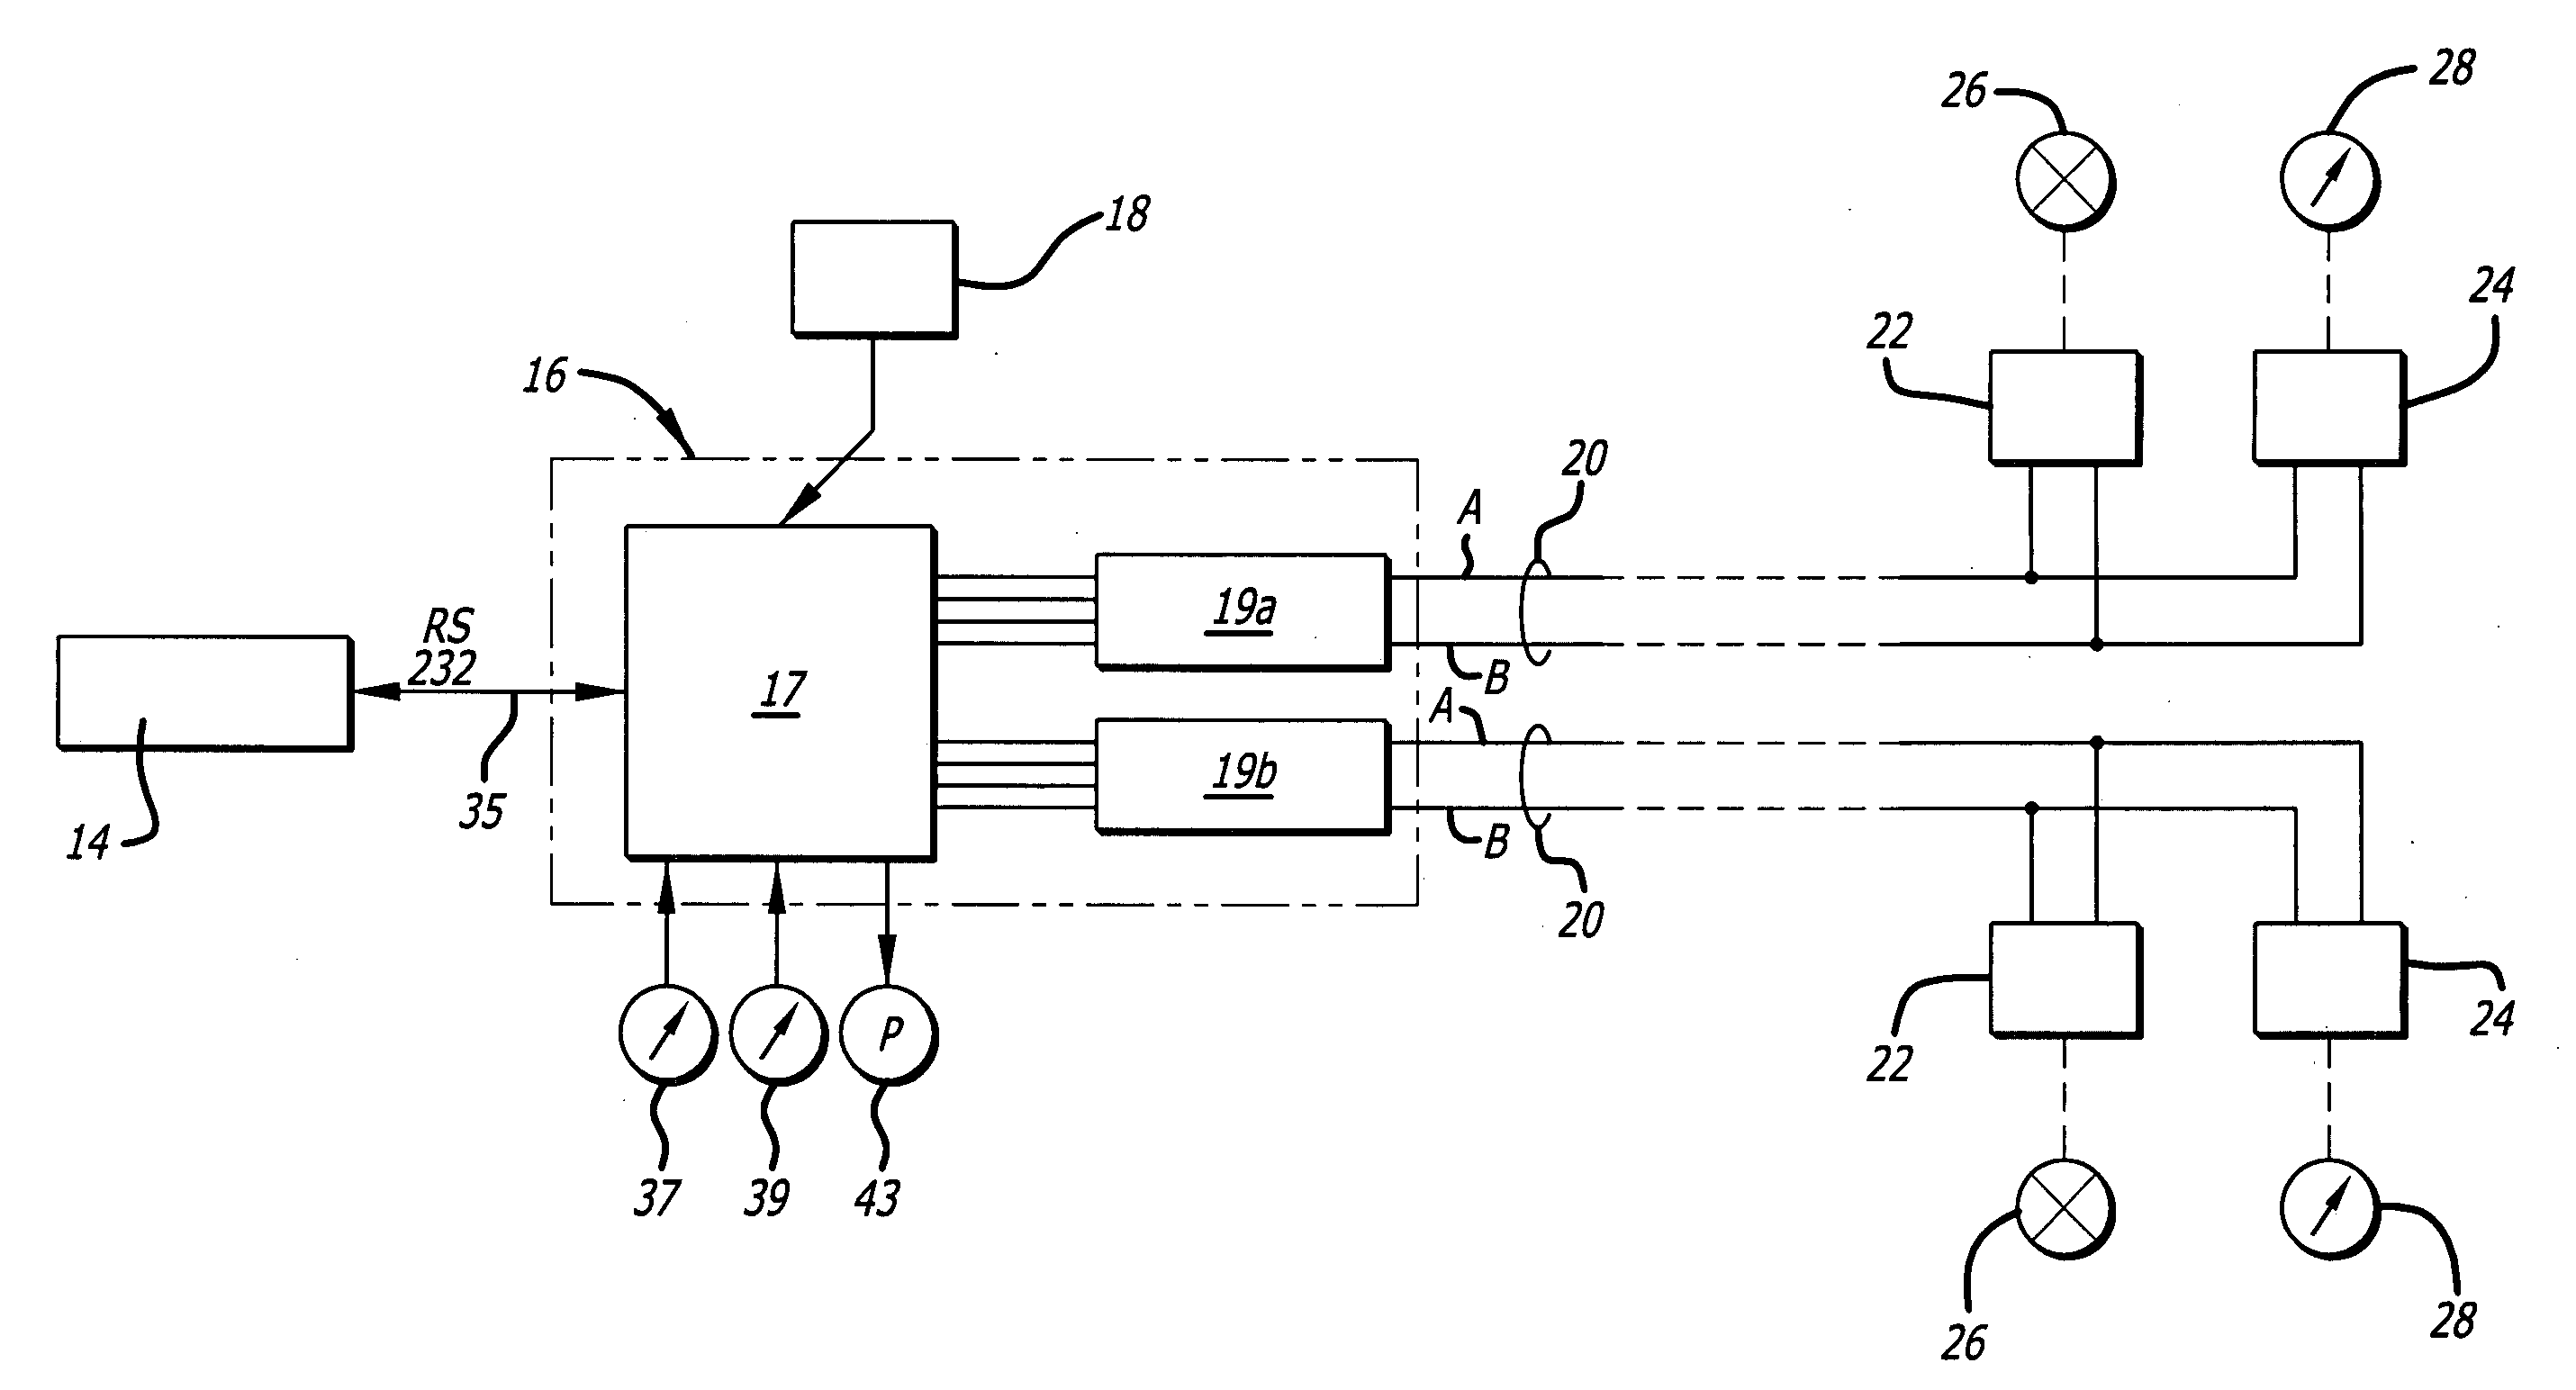 Two-wire power and communications for irrigation systems